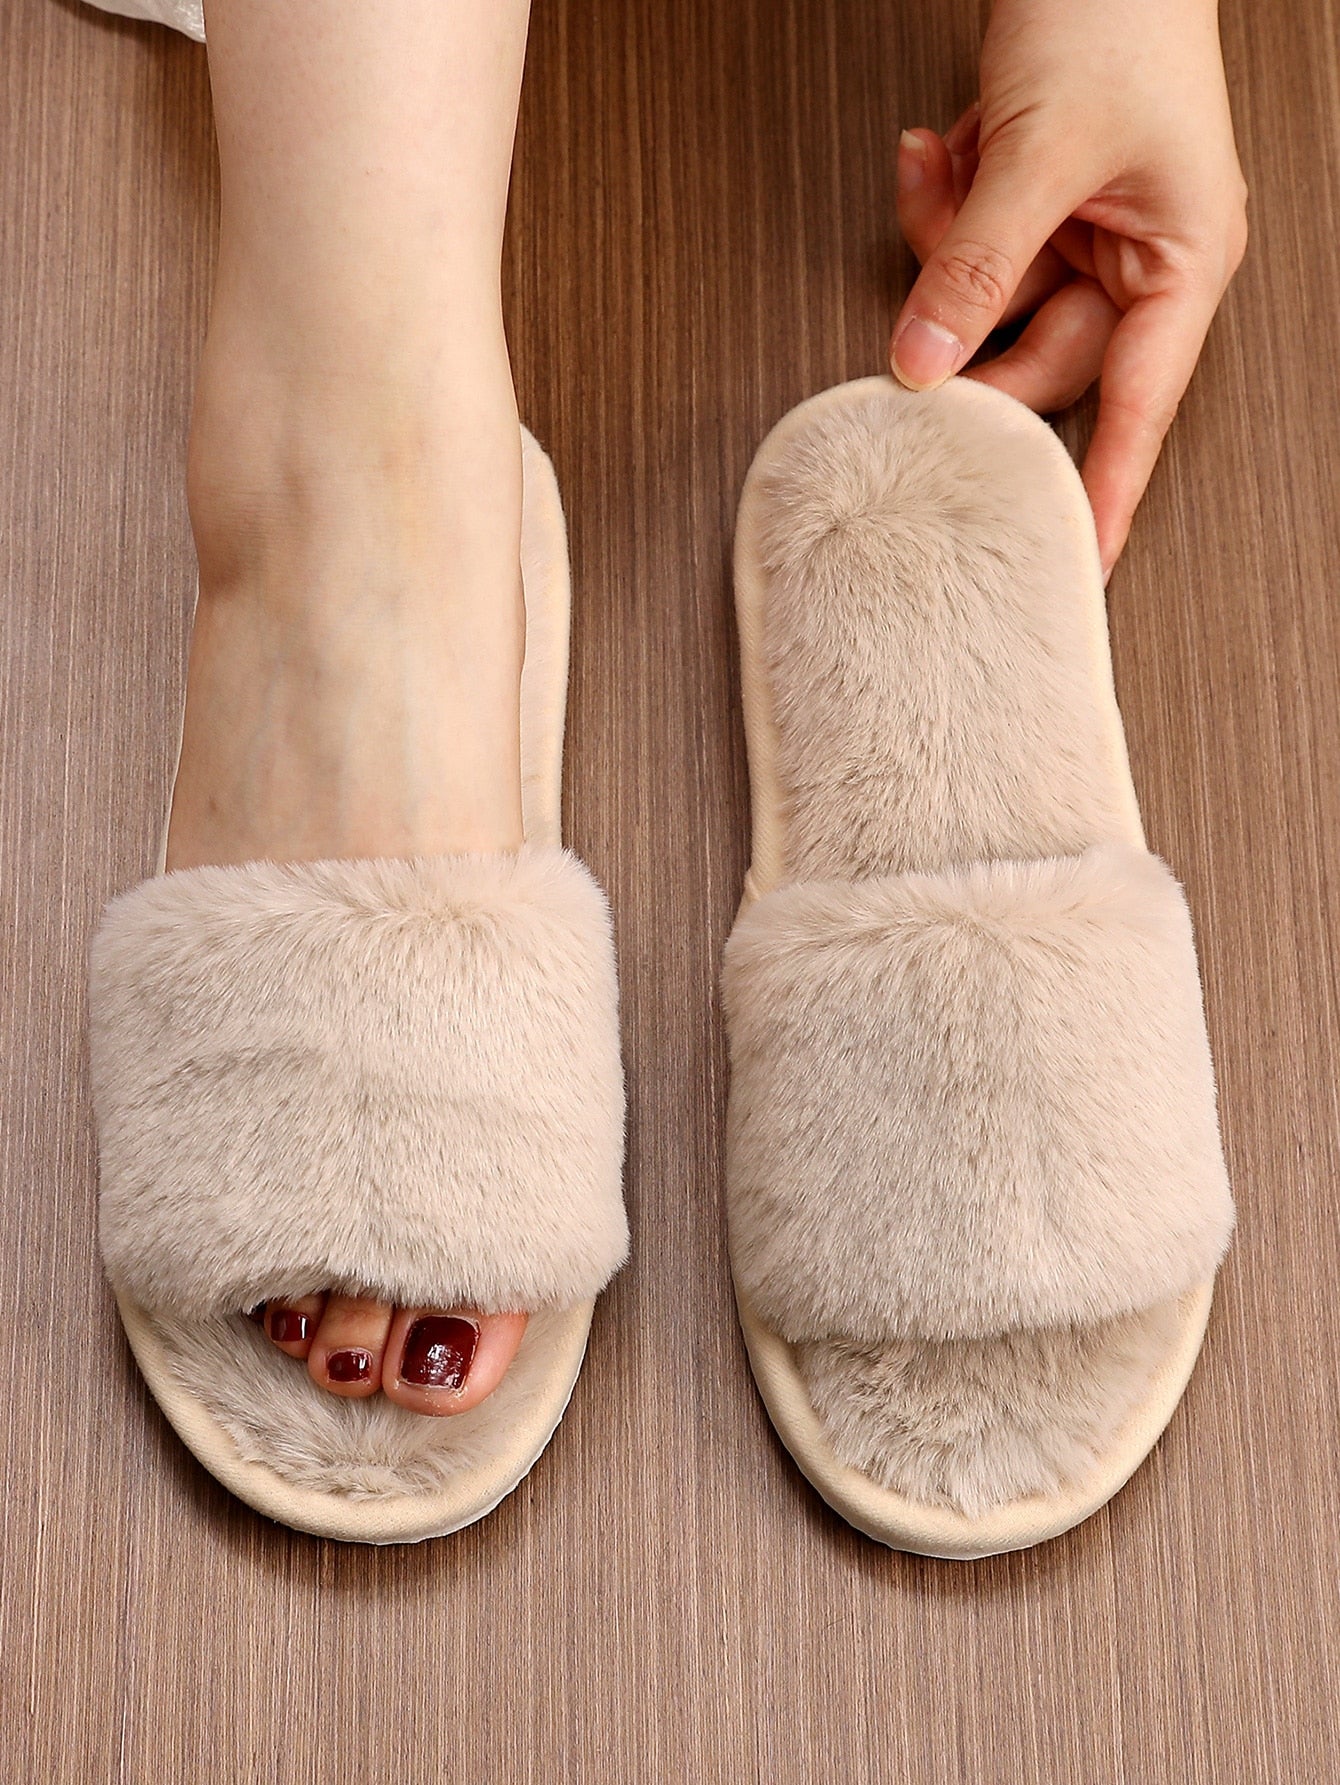 Furry Open Toe Slippers for Women, Soft and Warm Indoor House Slippers for Spring, Autumn and Winter